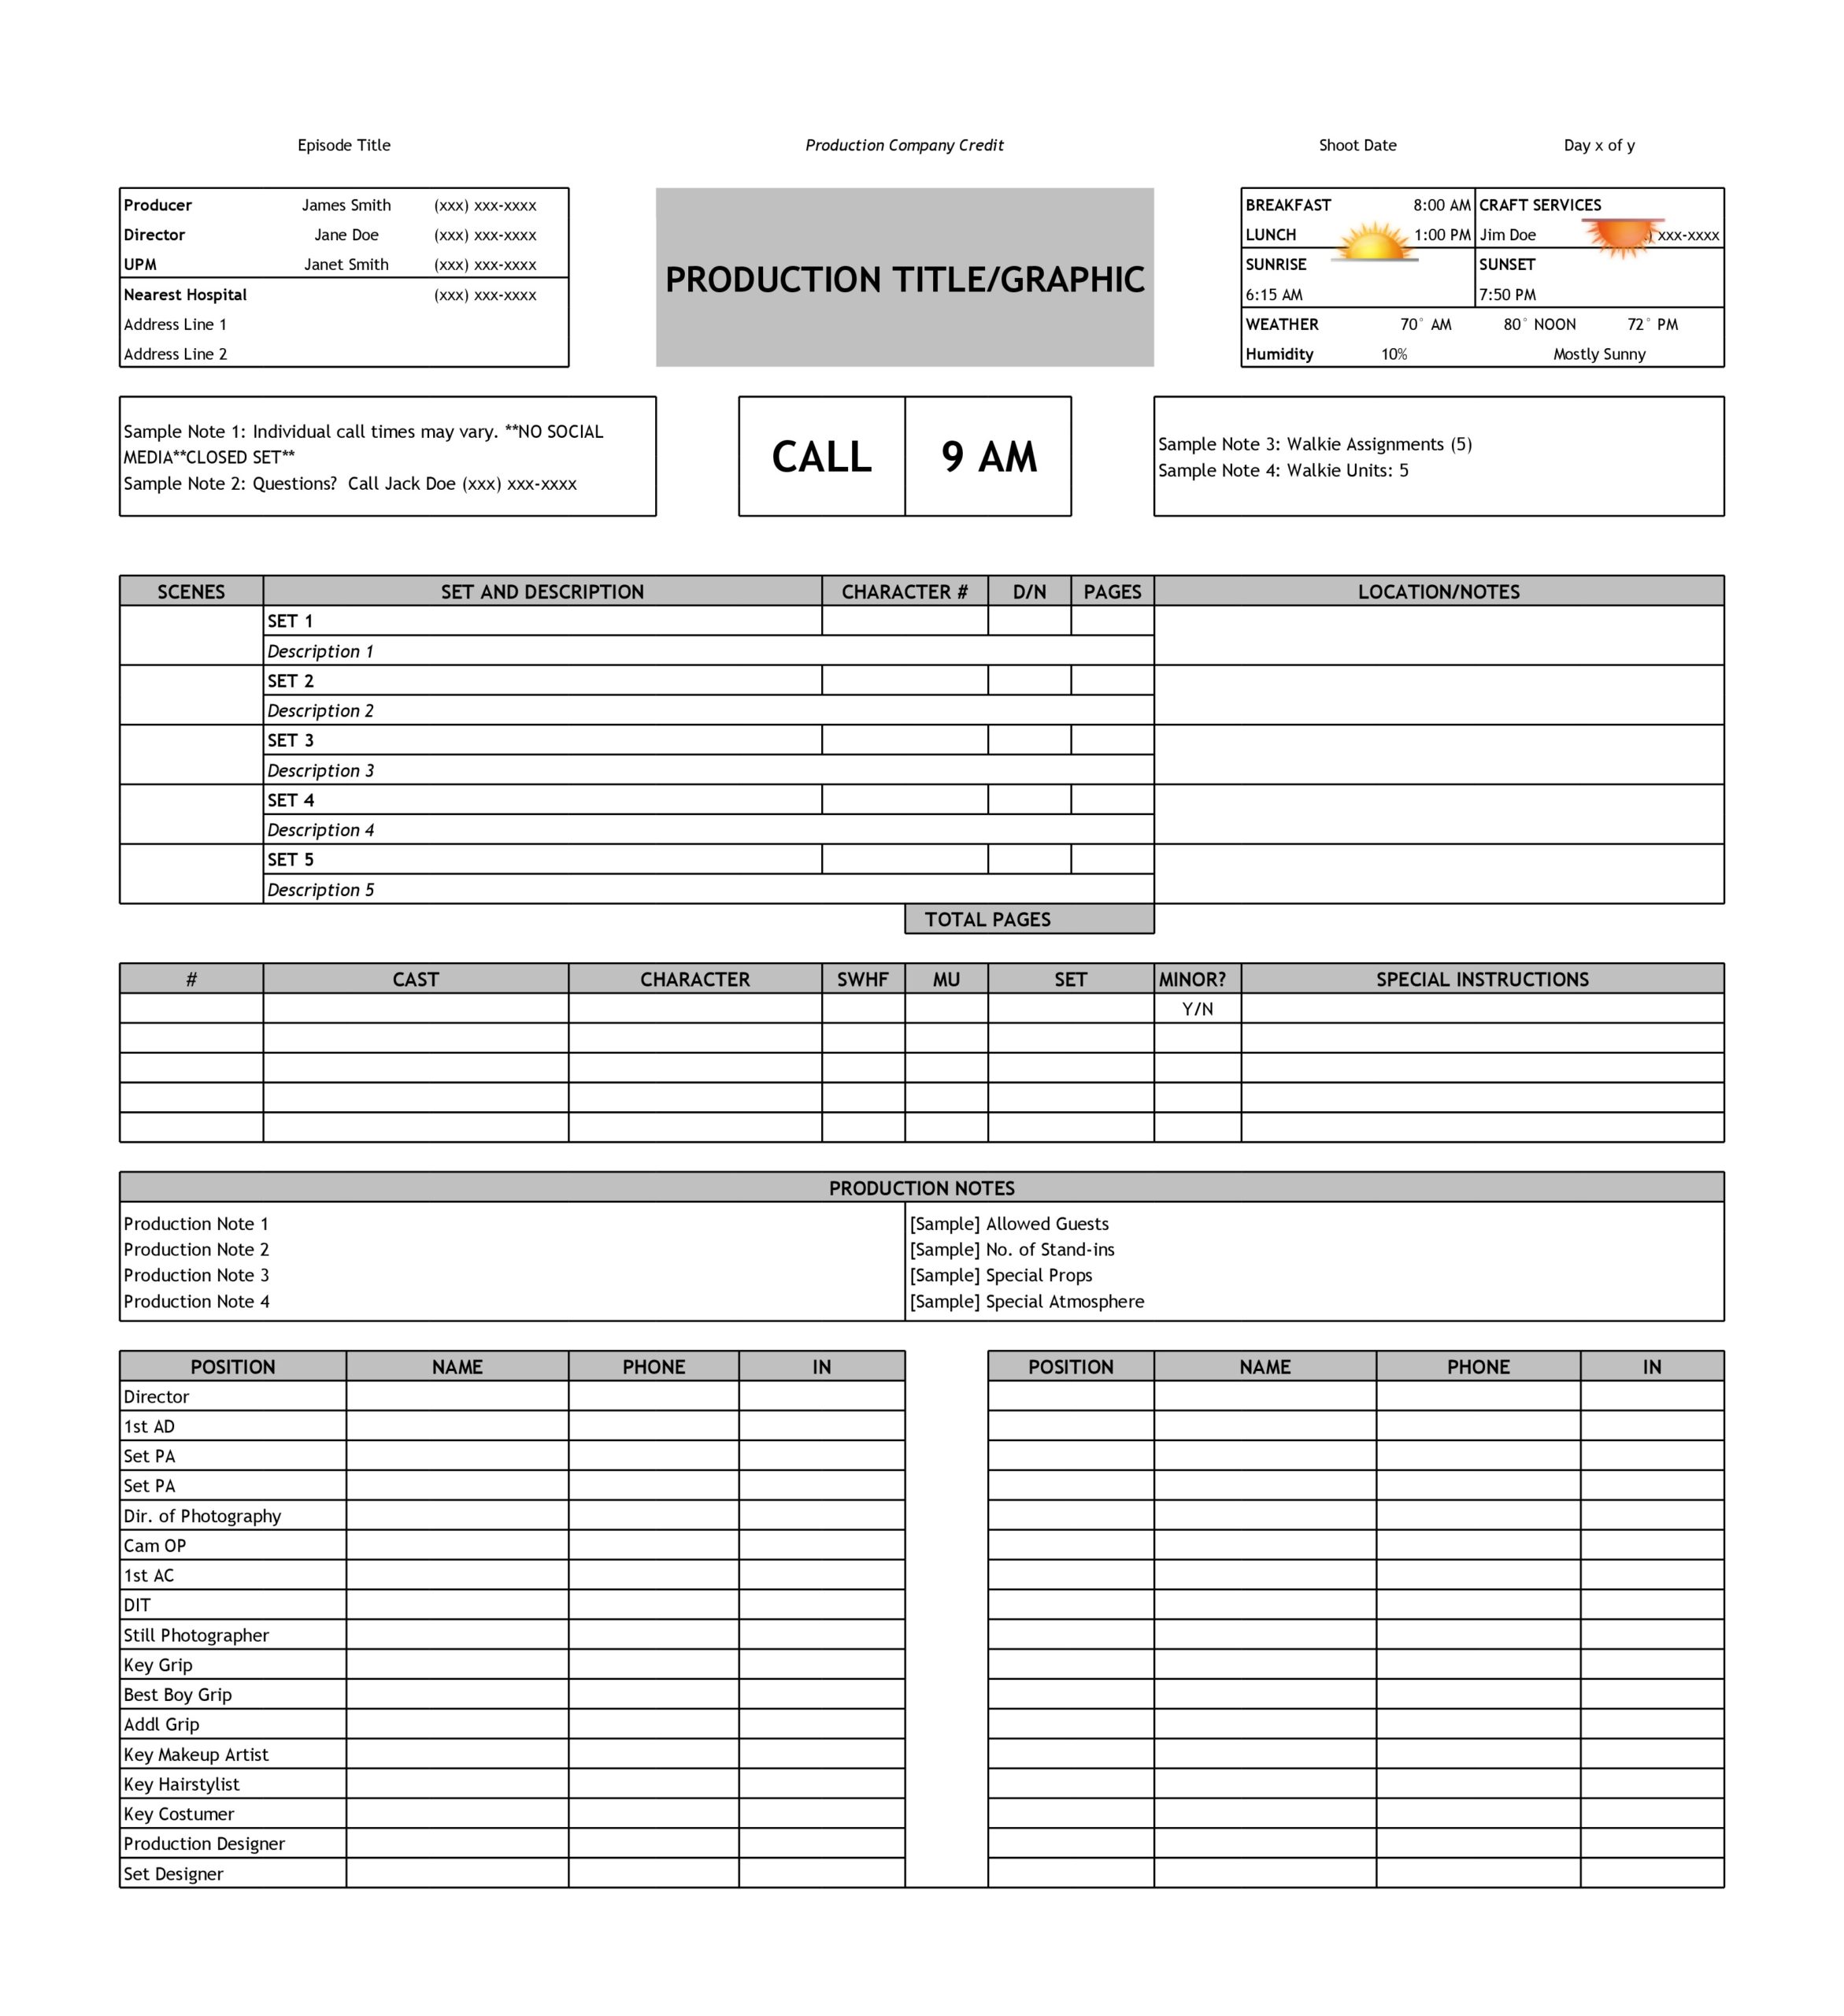 20 Simple Call Sheet Templates (FREE) - TemplateArchive With Film Call Sheet Template Word